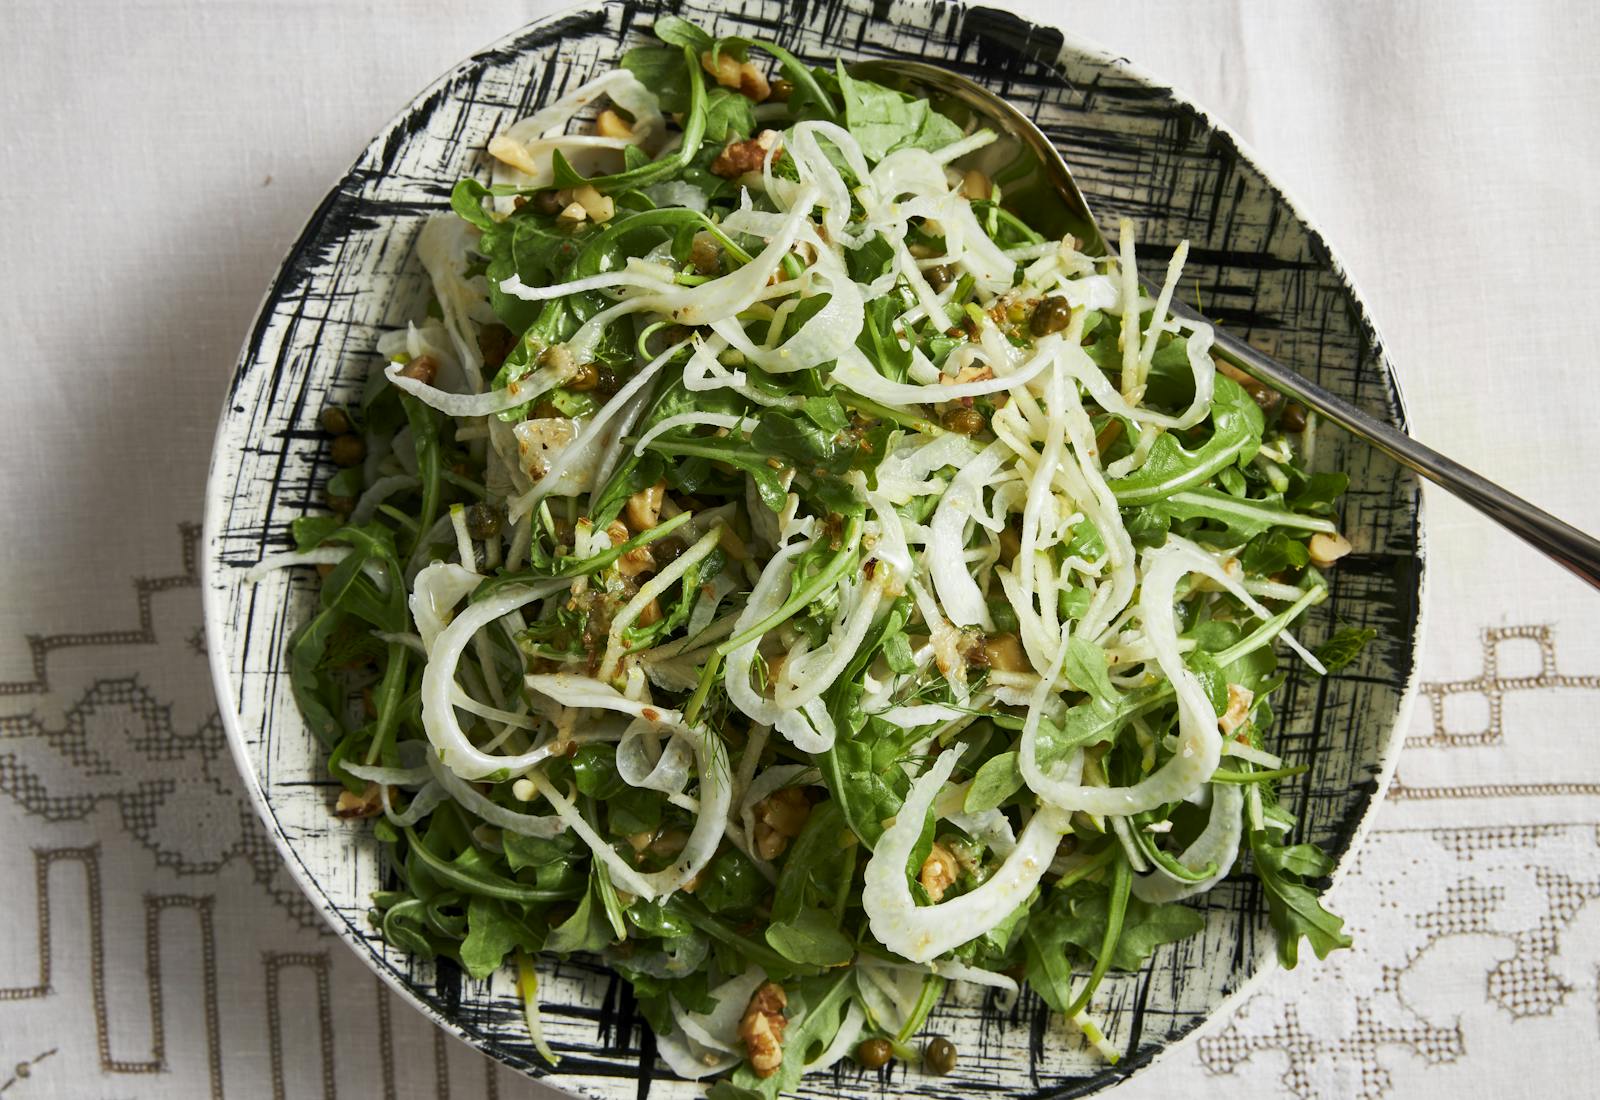 Arugula salad with shaved fennel in black and white striped bowl.